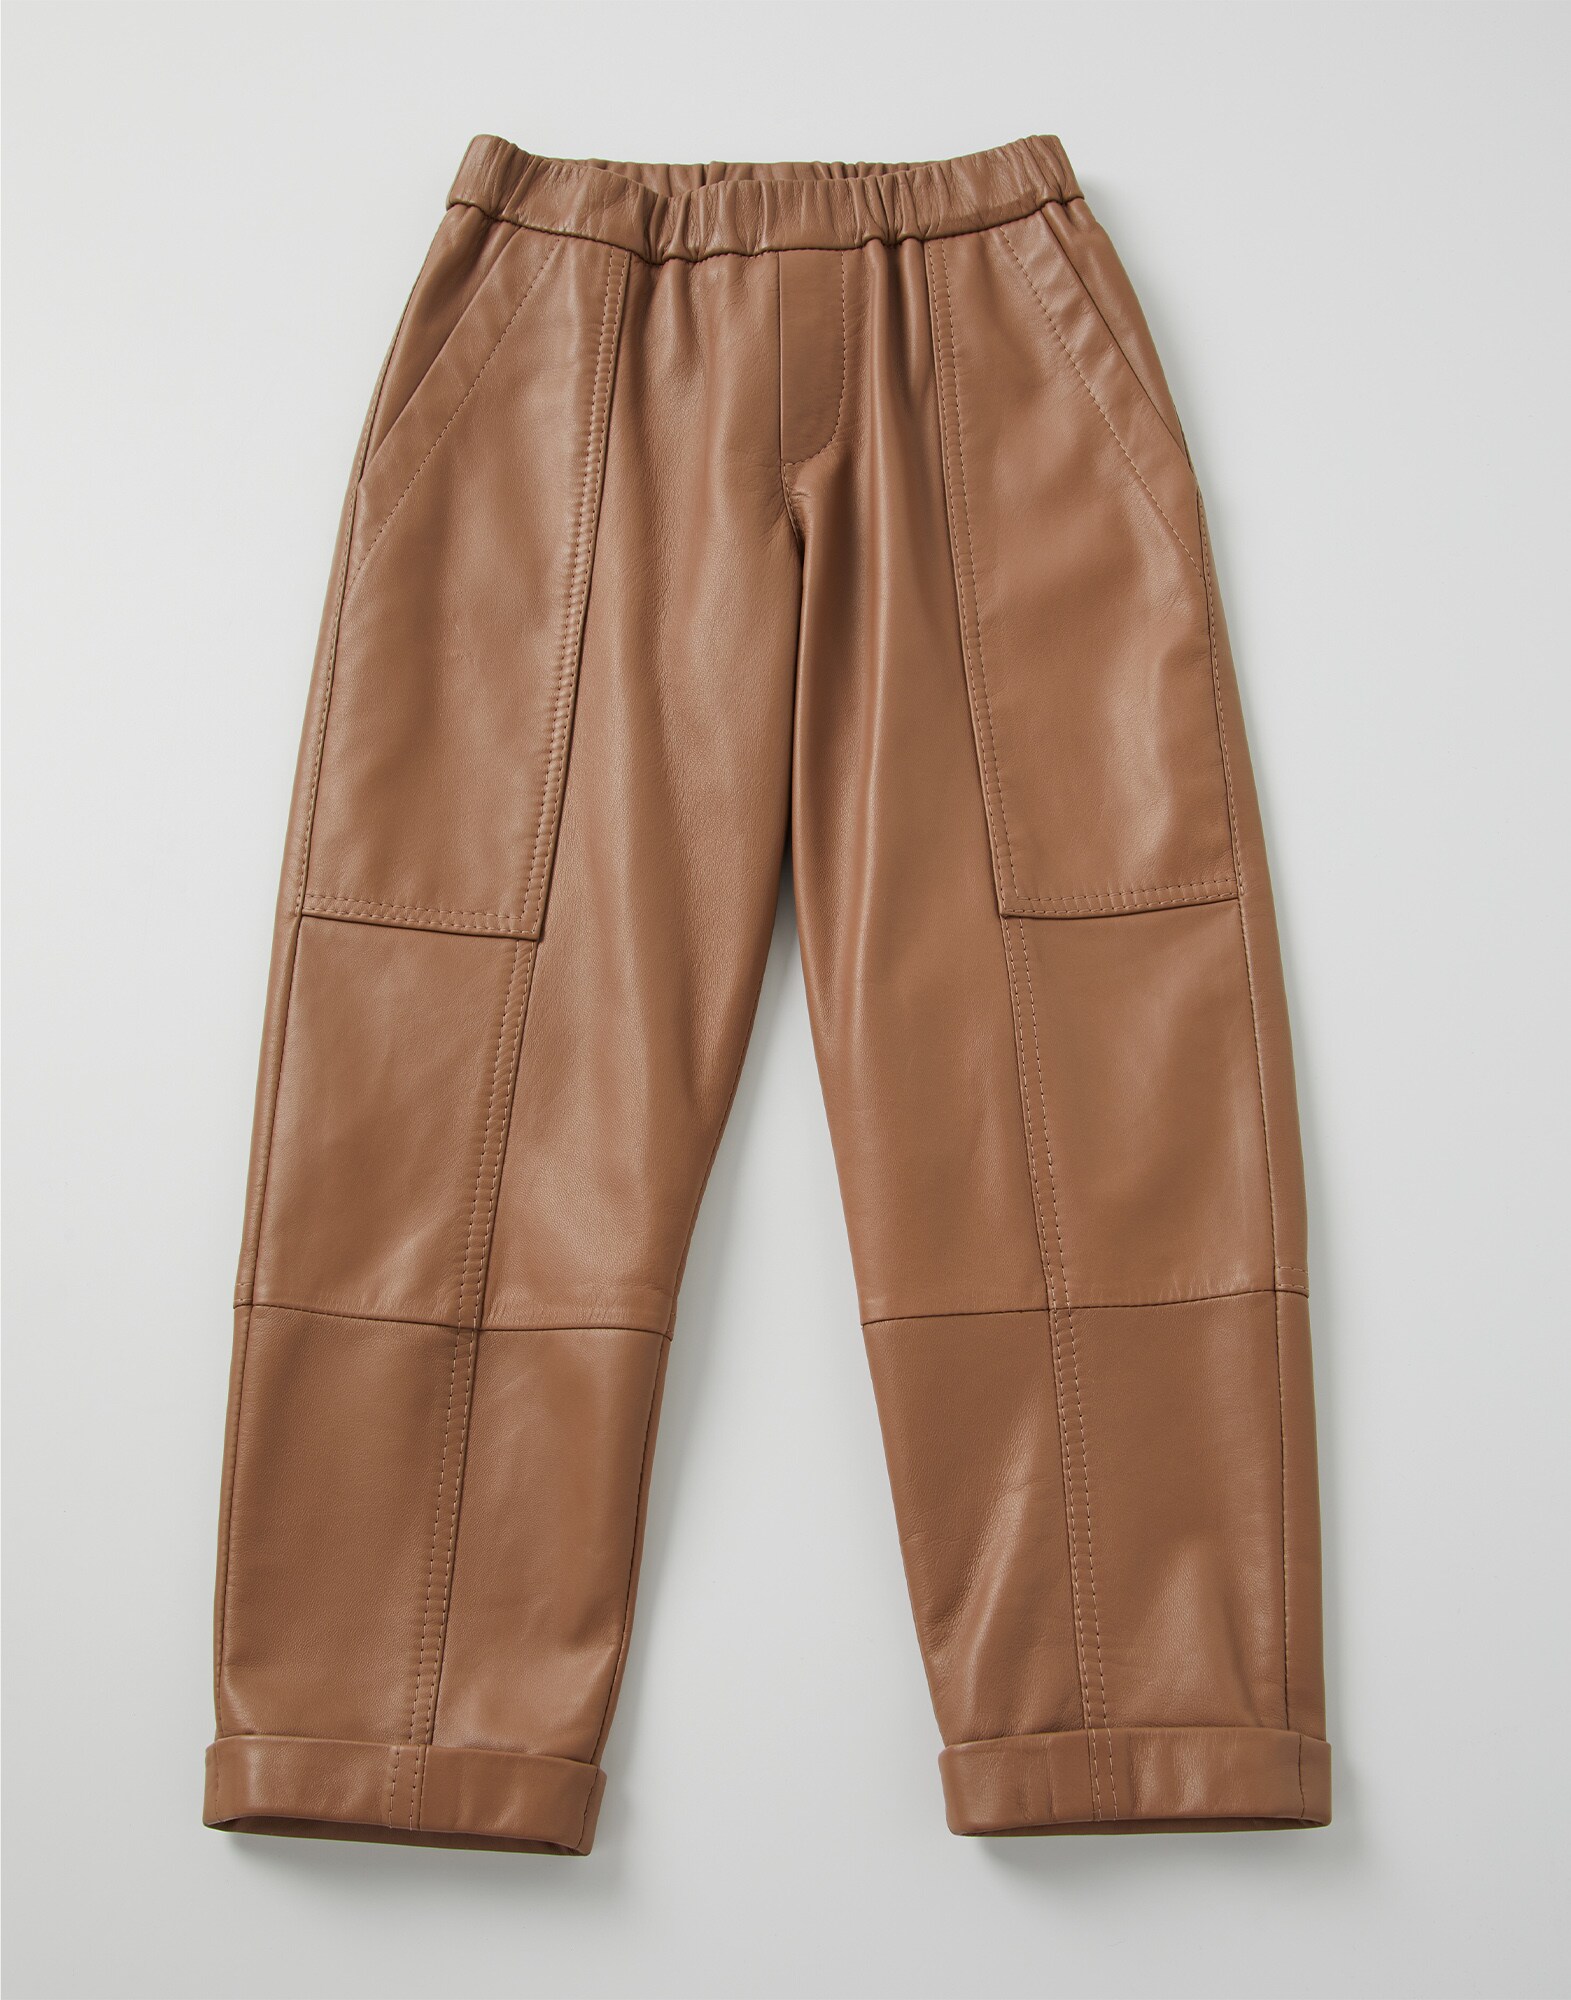 Utility trousers